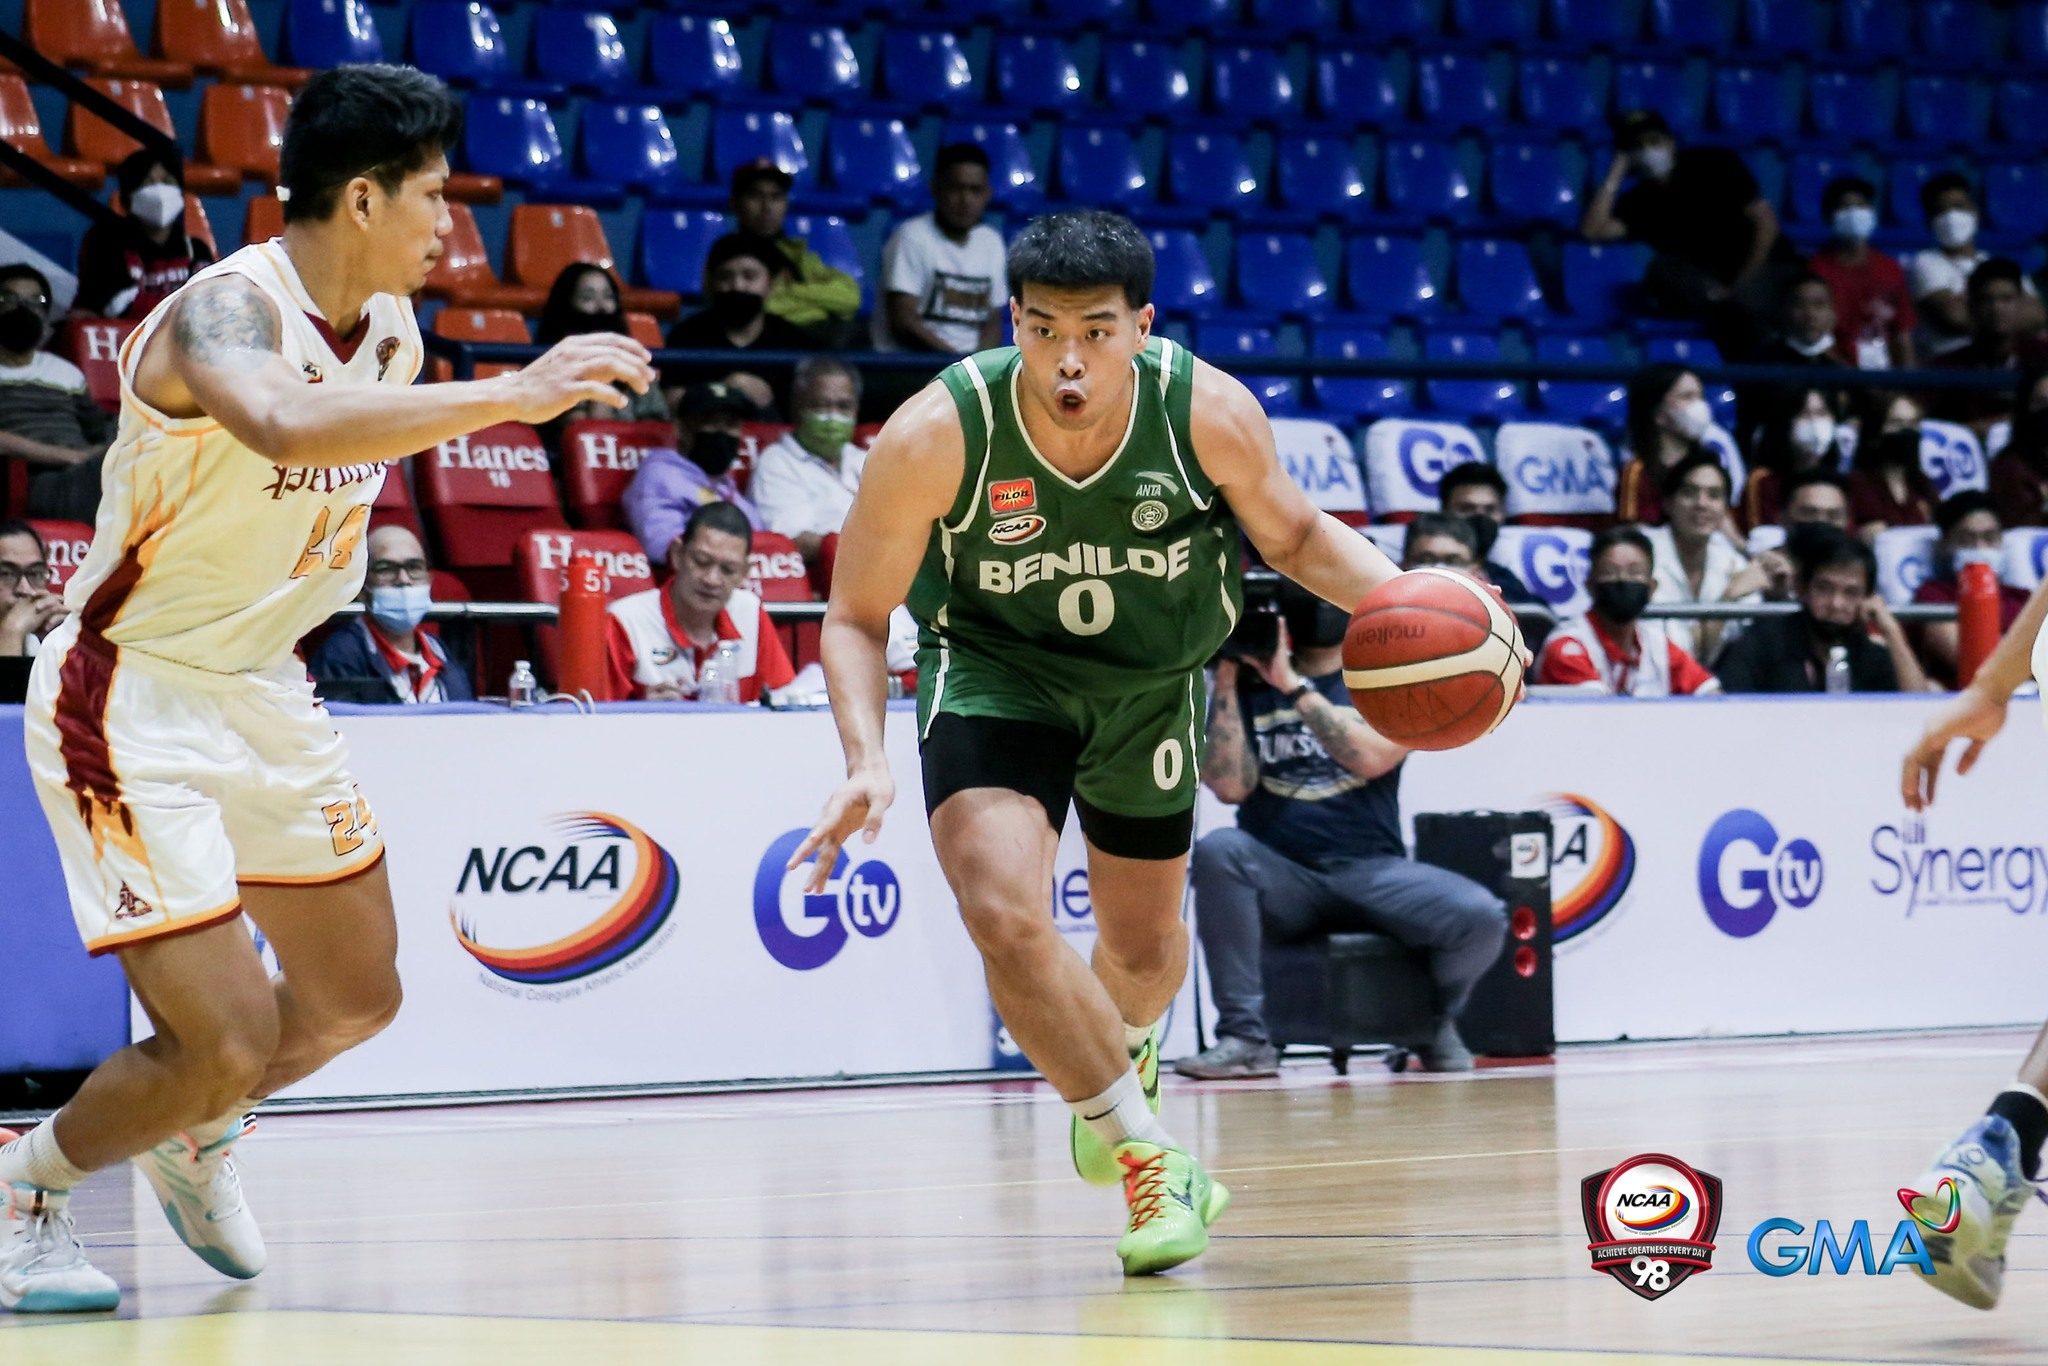 Will Gozum lives up to preseason hype with NCAA Player of the Week award